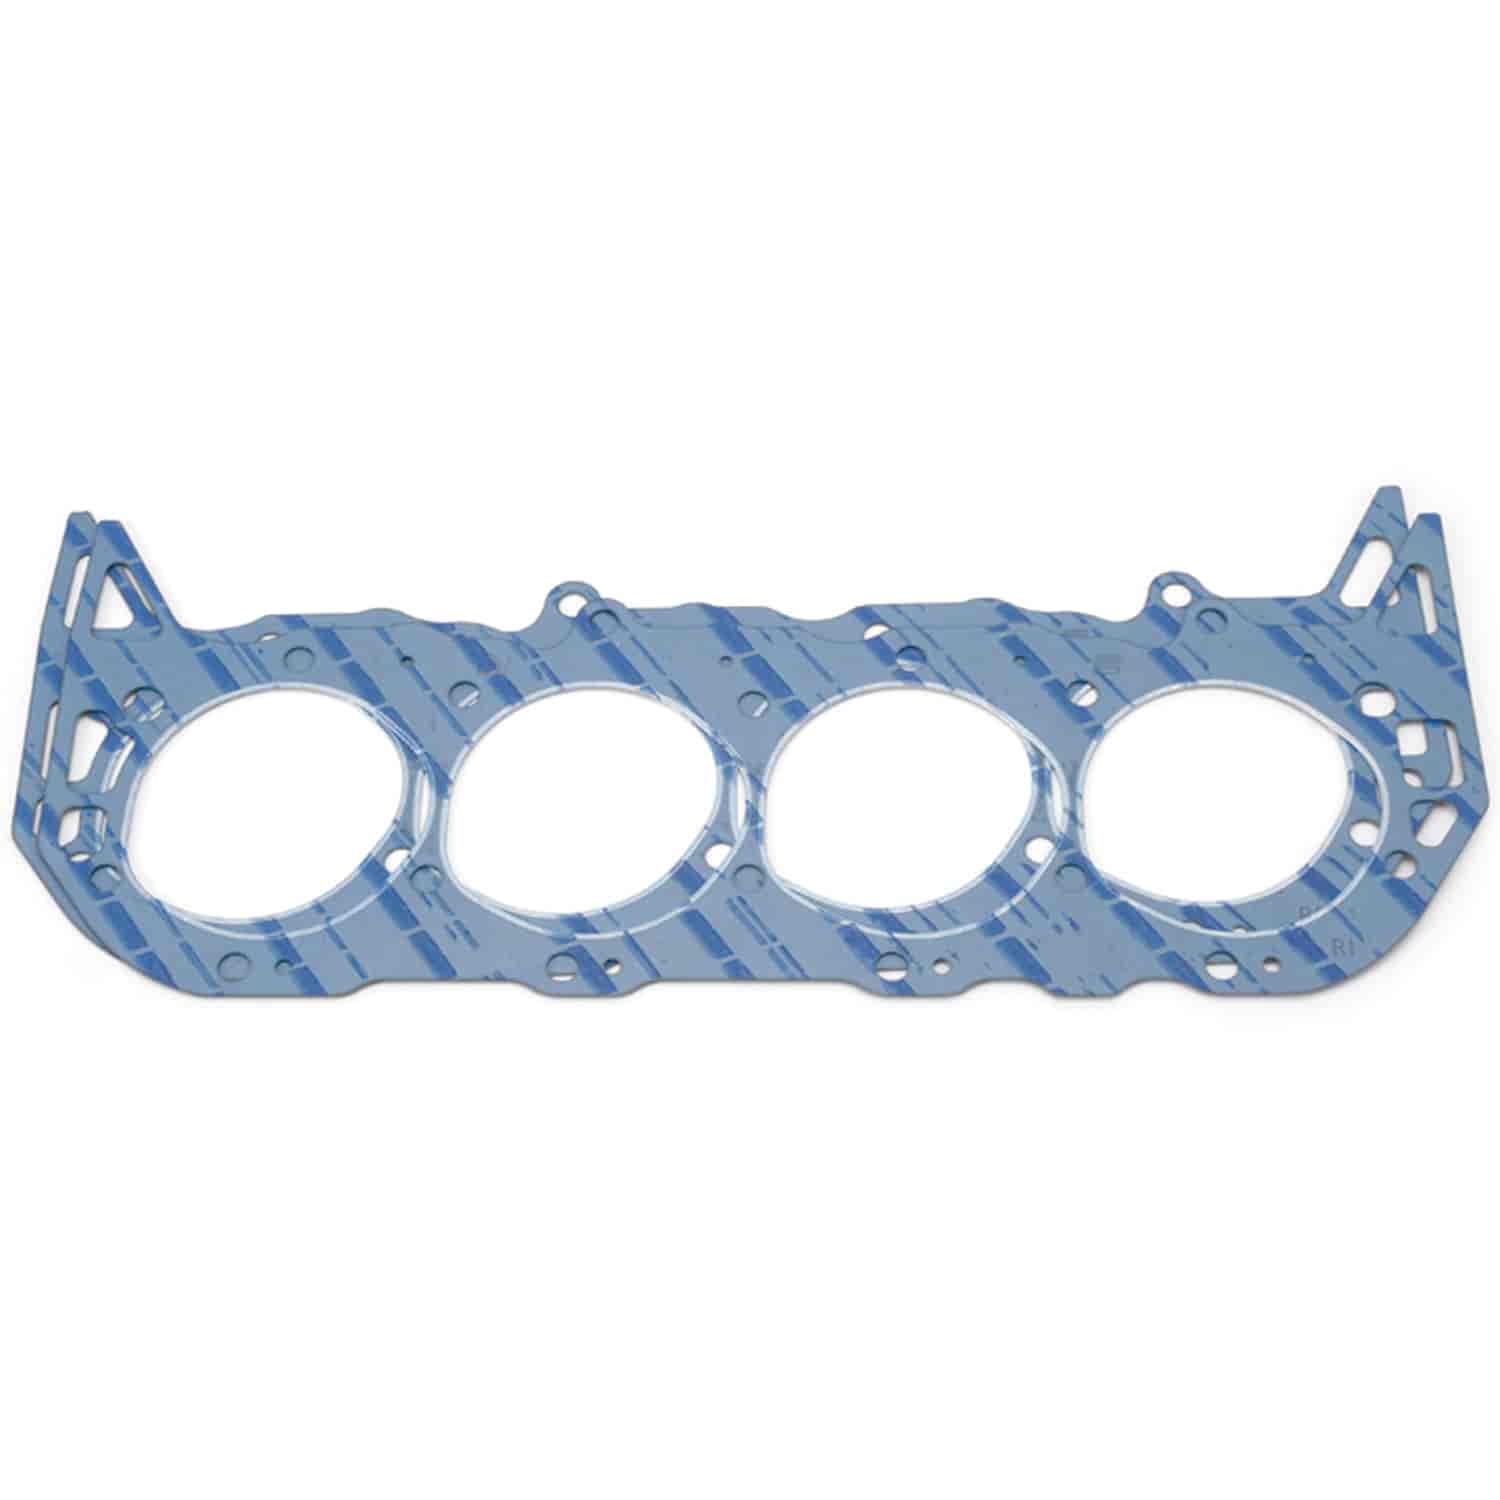 Head Gaskets for 1965-1990 Big Block Chevy 396-454